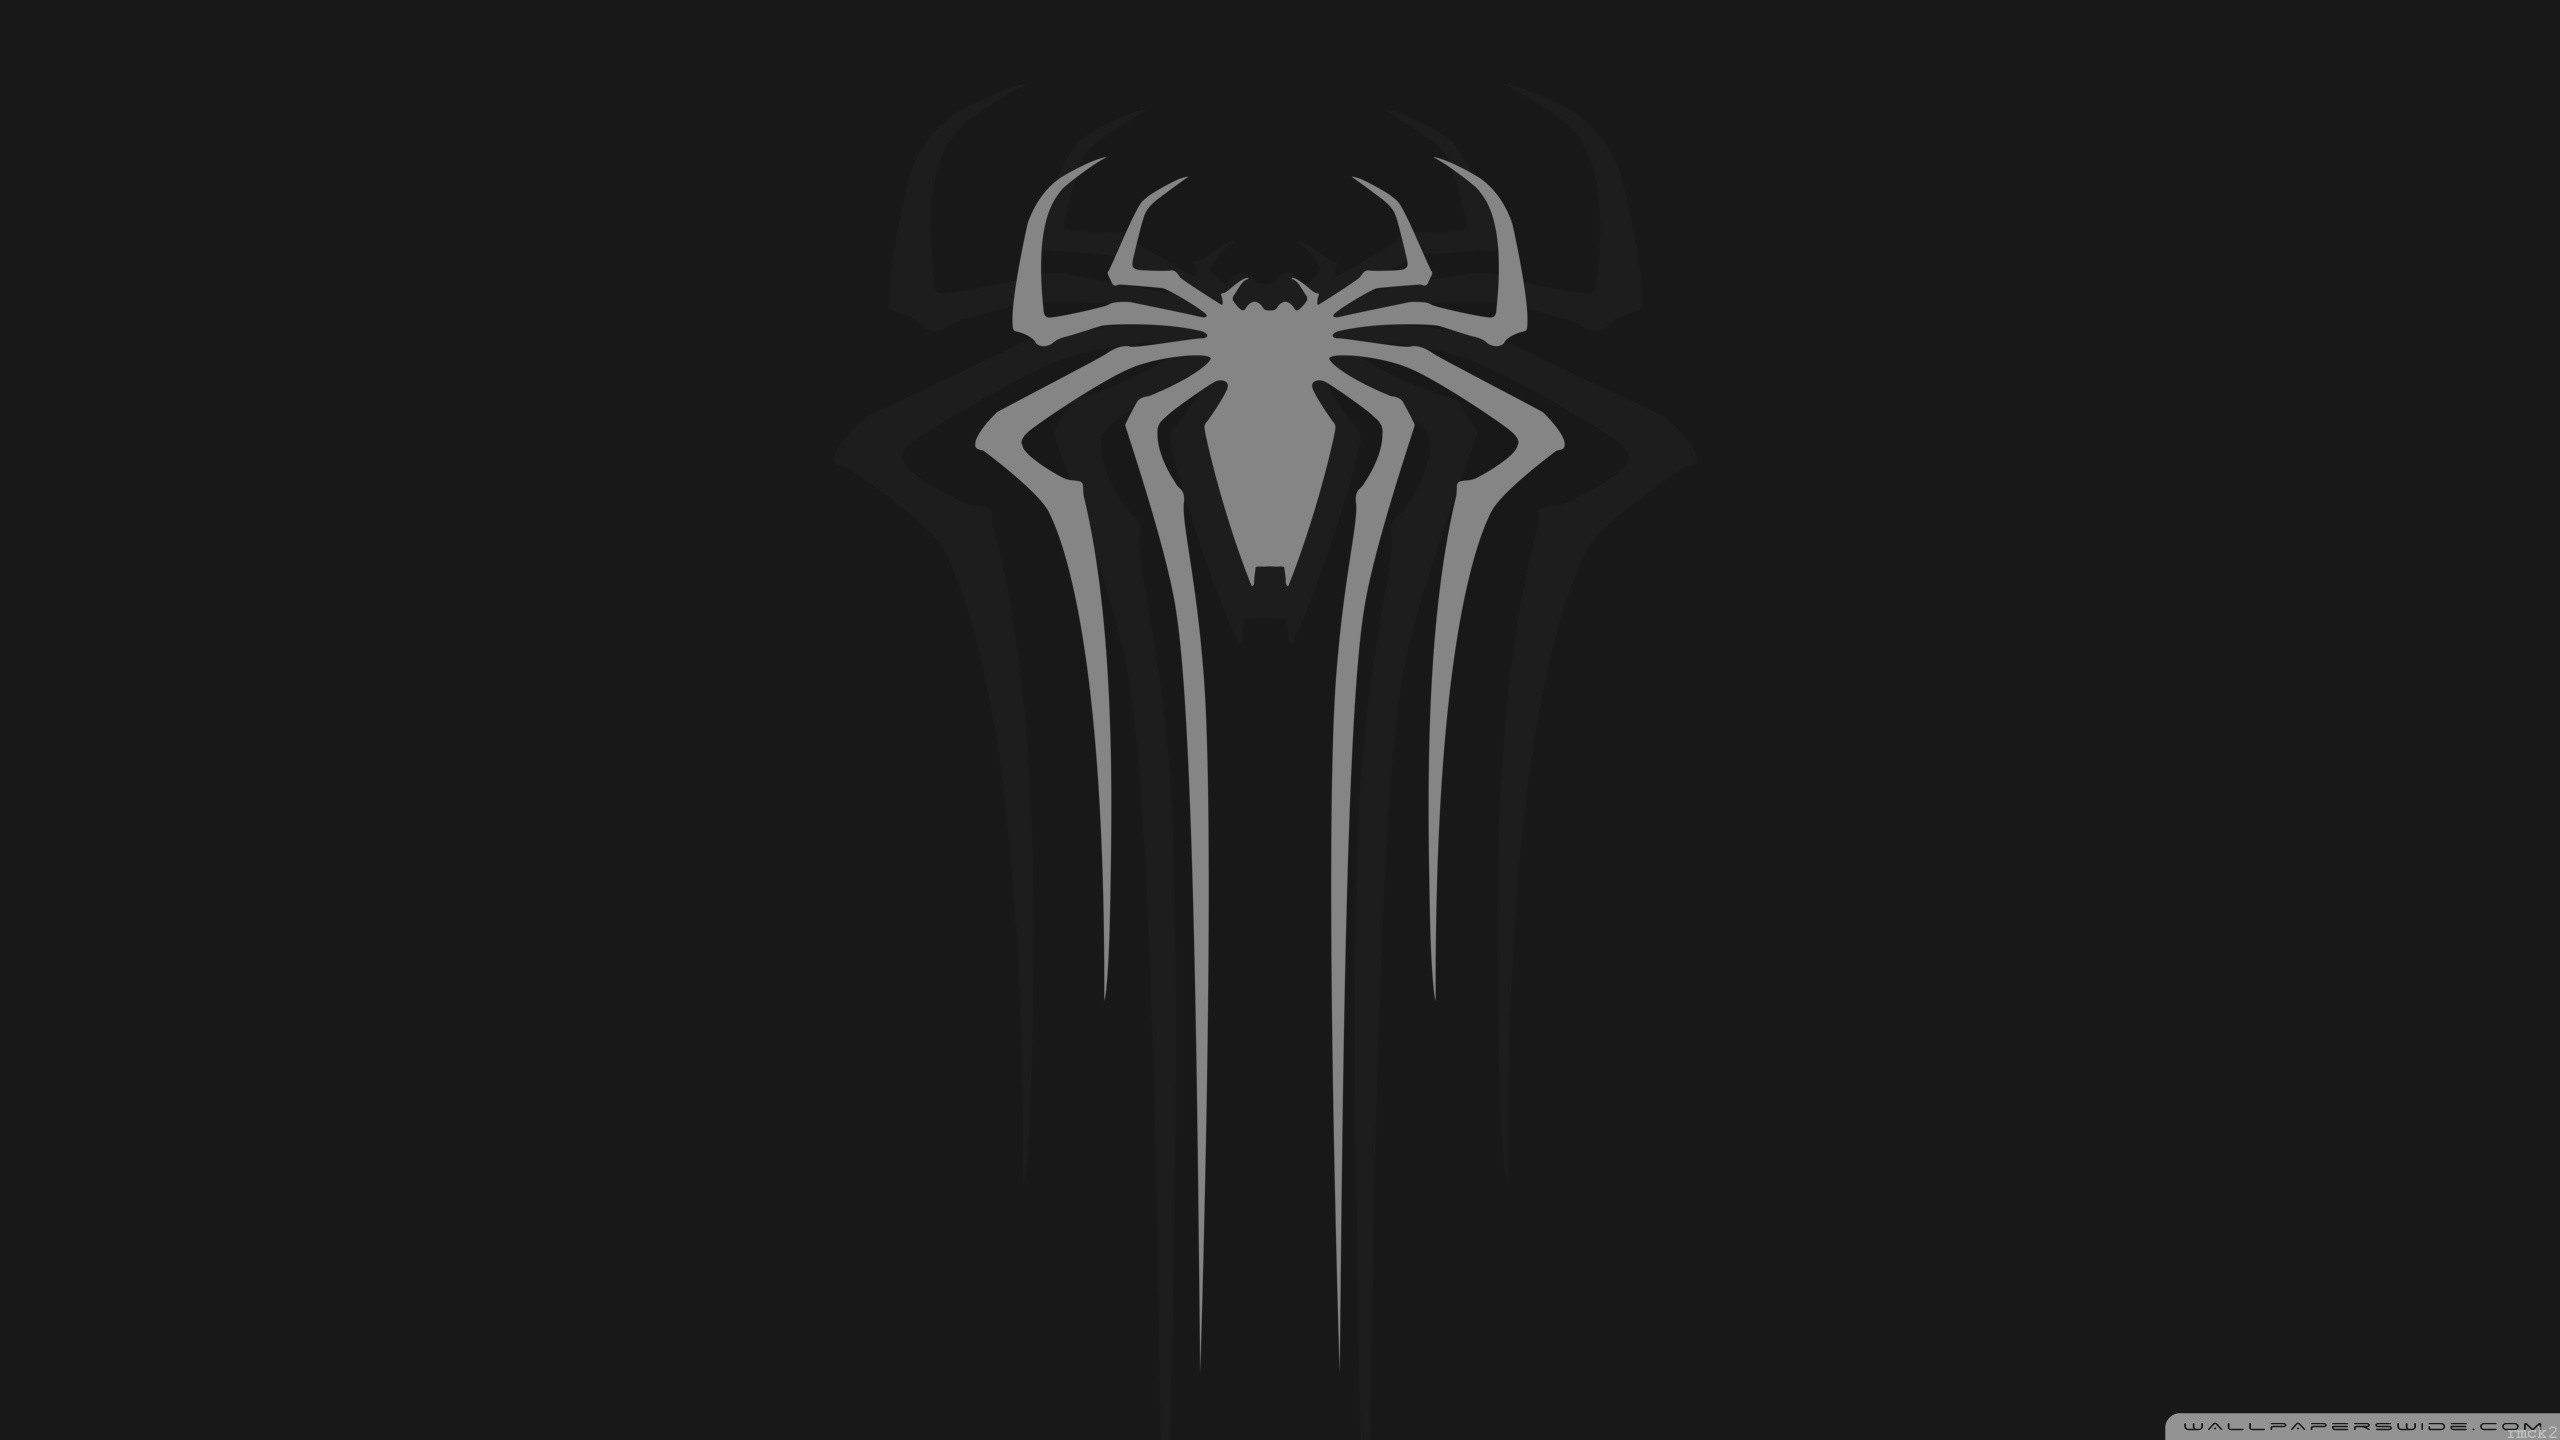 2560x1440 Spider-man White HD Wide Wallpaper for Widescreen